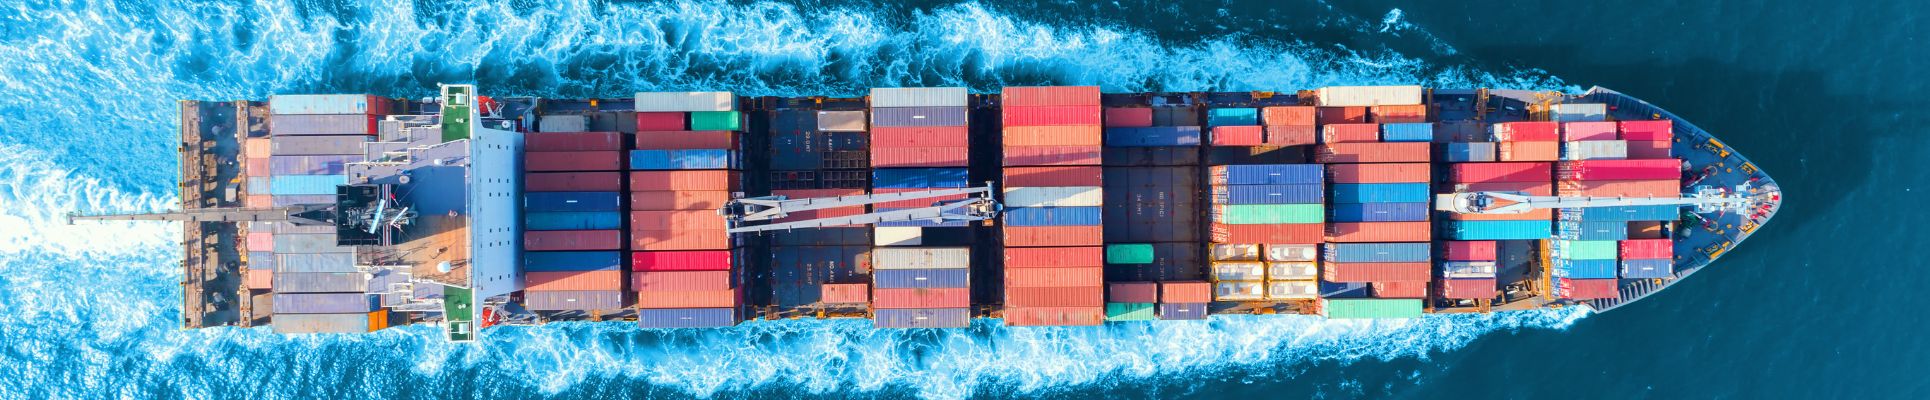 4 Things To Know About Ocean Freight Shipping